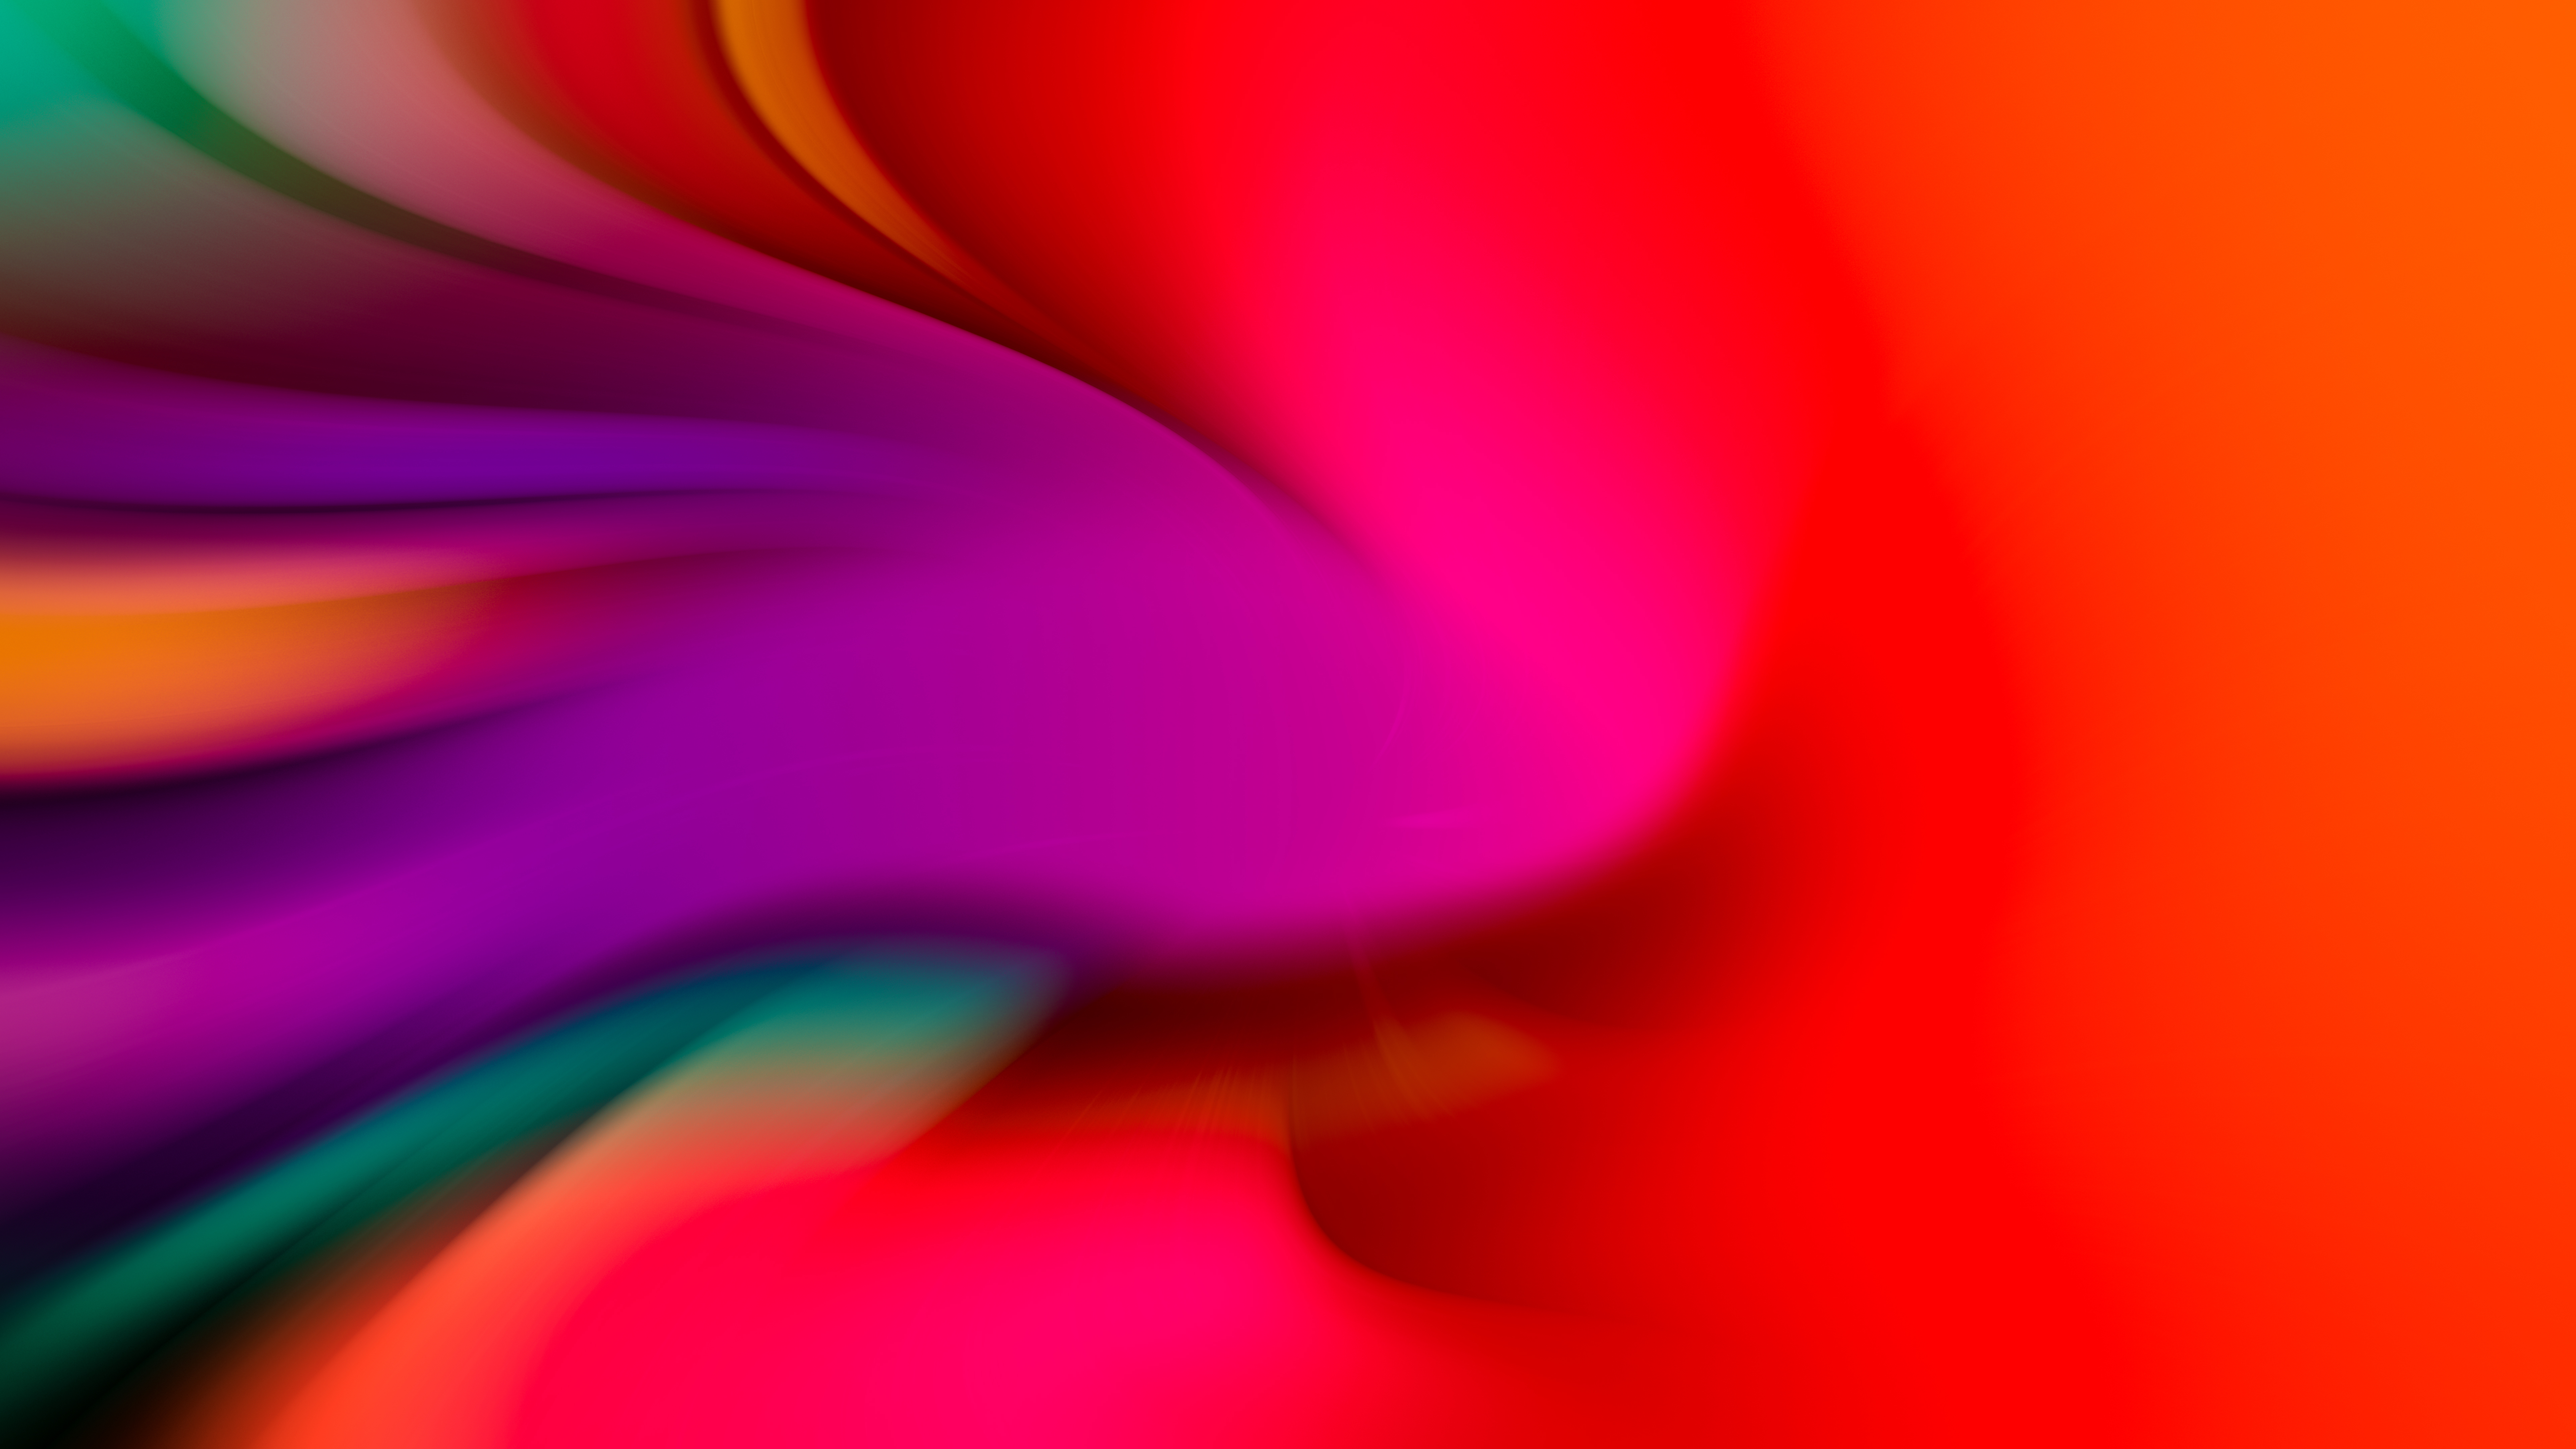 Download wallpaper 7680x4320 colorful glow, warmhole, abstract 8k wallpaper,  7680x4320 8k background, 26990